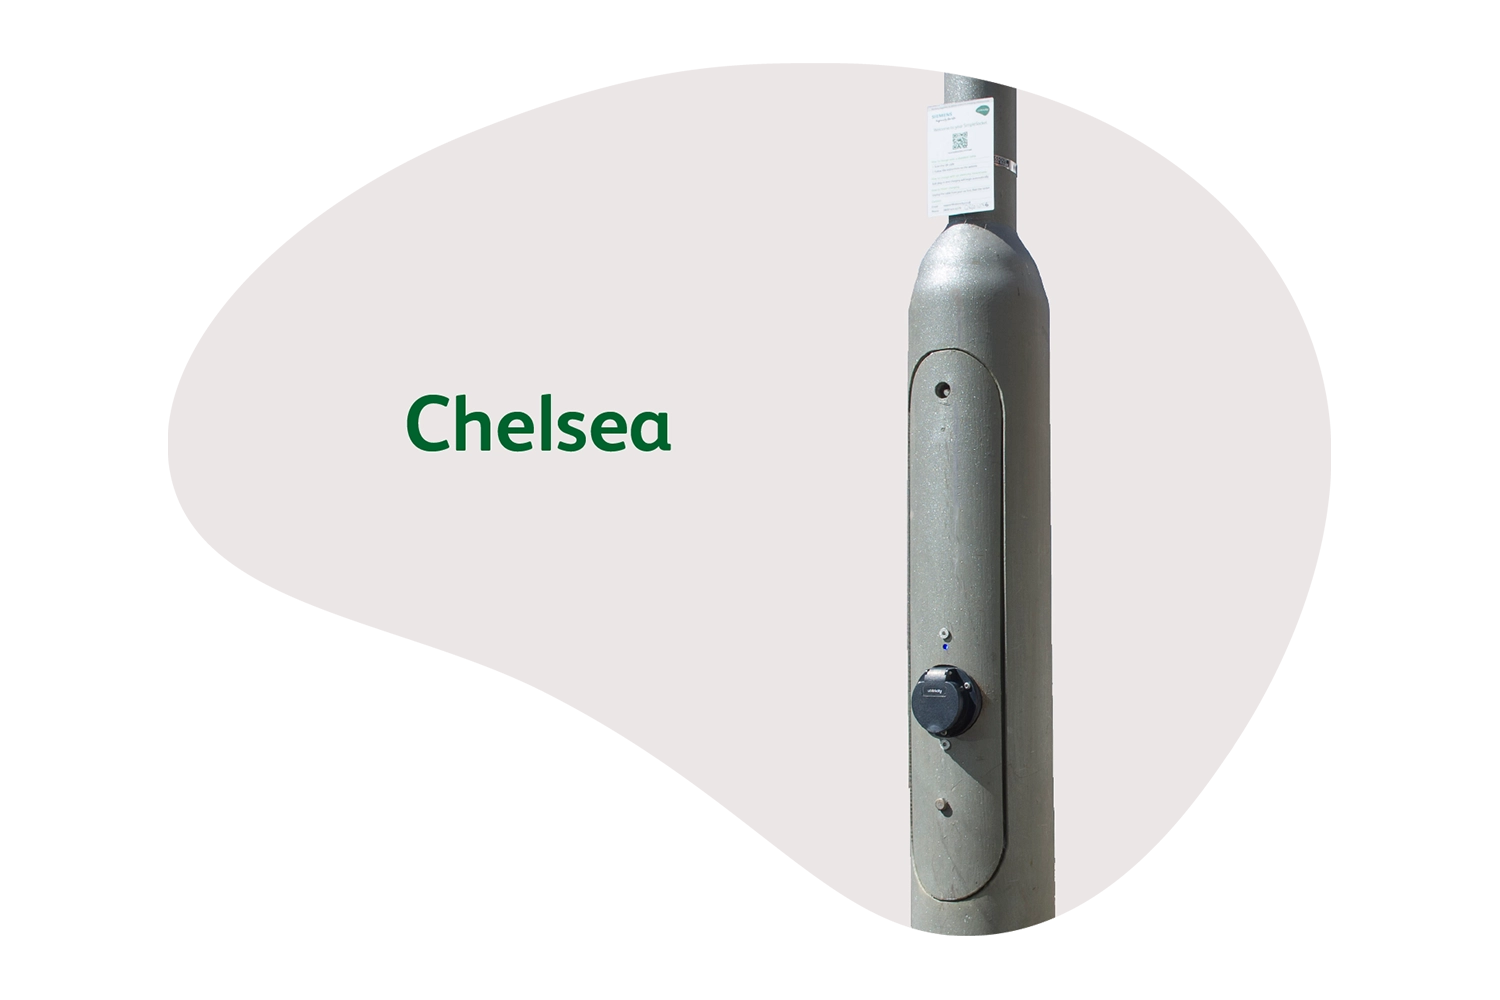 Illustration of ubitricity's public lamppost charging solution Chelsea, which can be used by local authorities to install charging stations in residential areas.